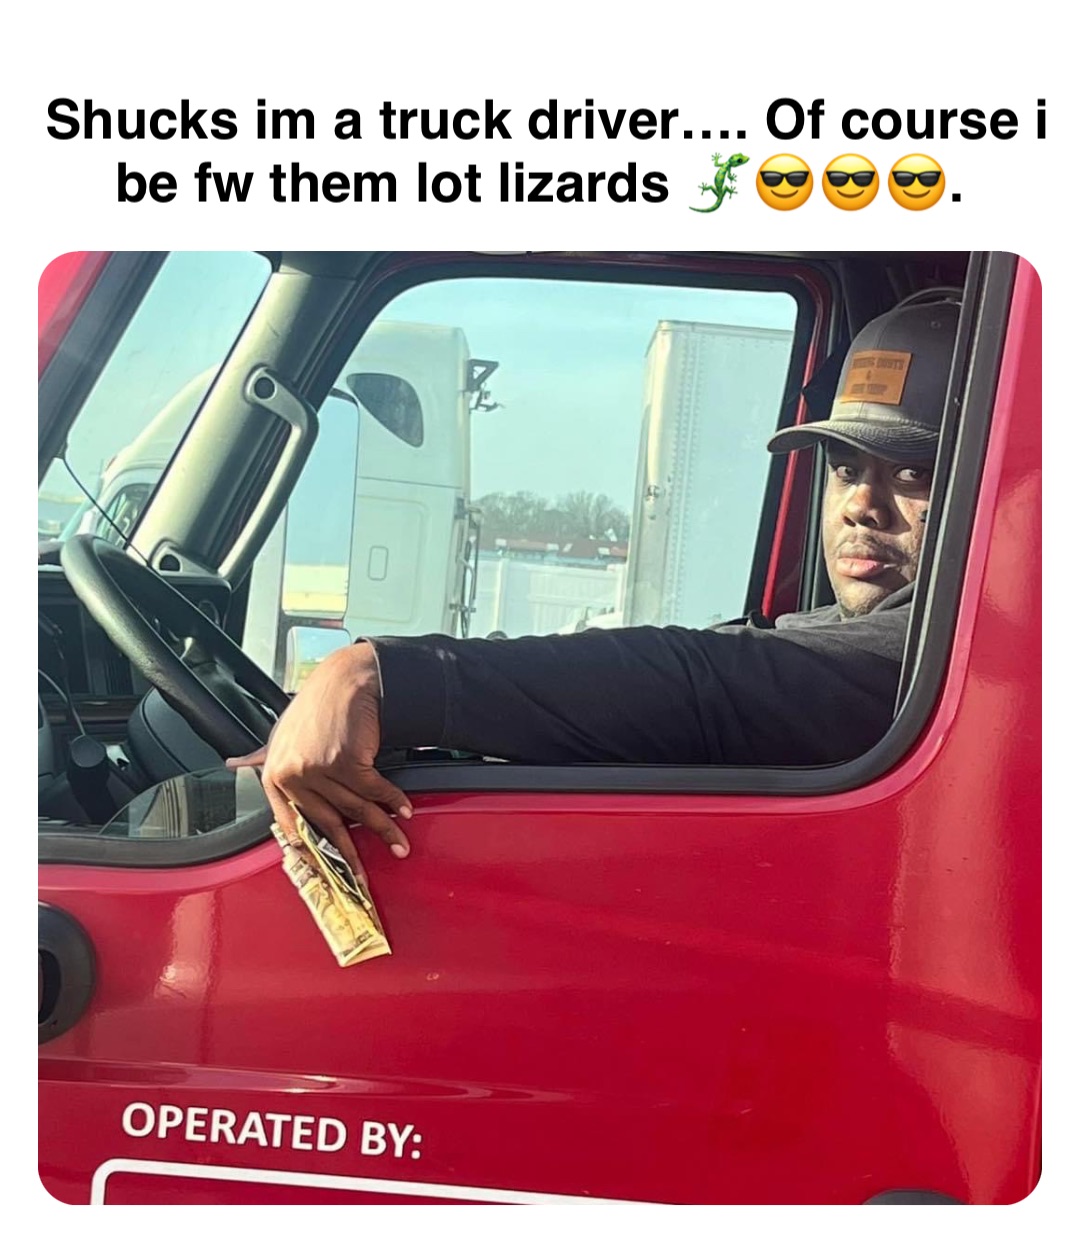 Double tap to edit Shucks im a truck driver…. Of course i be fw them lot lizards 🦎😎😎😎.